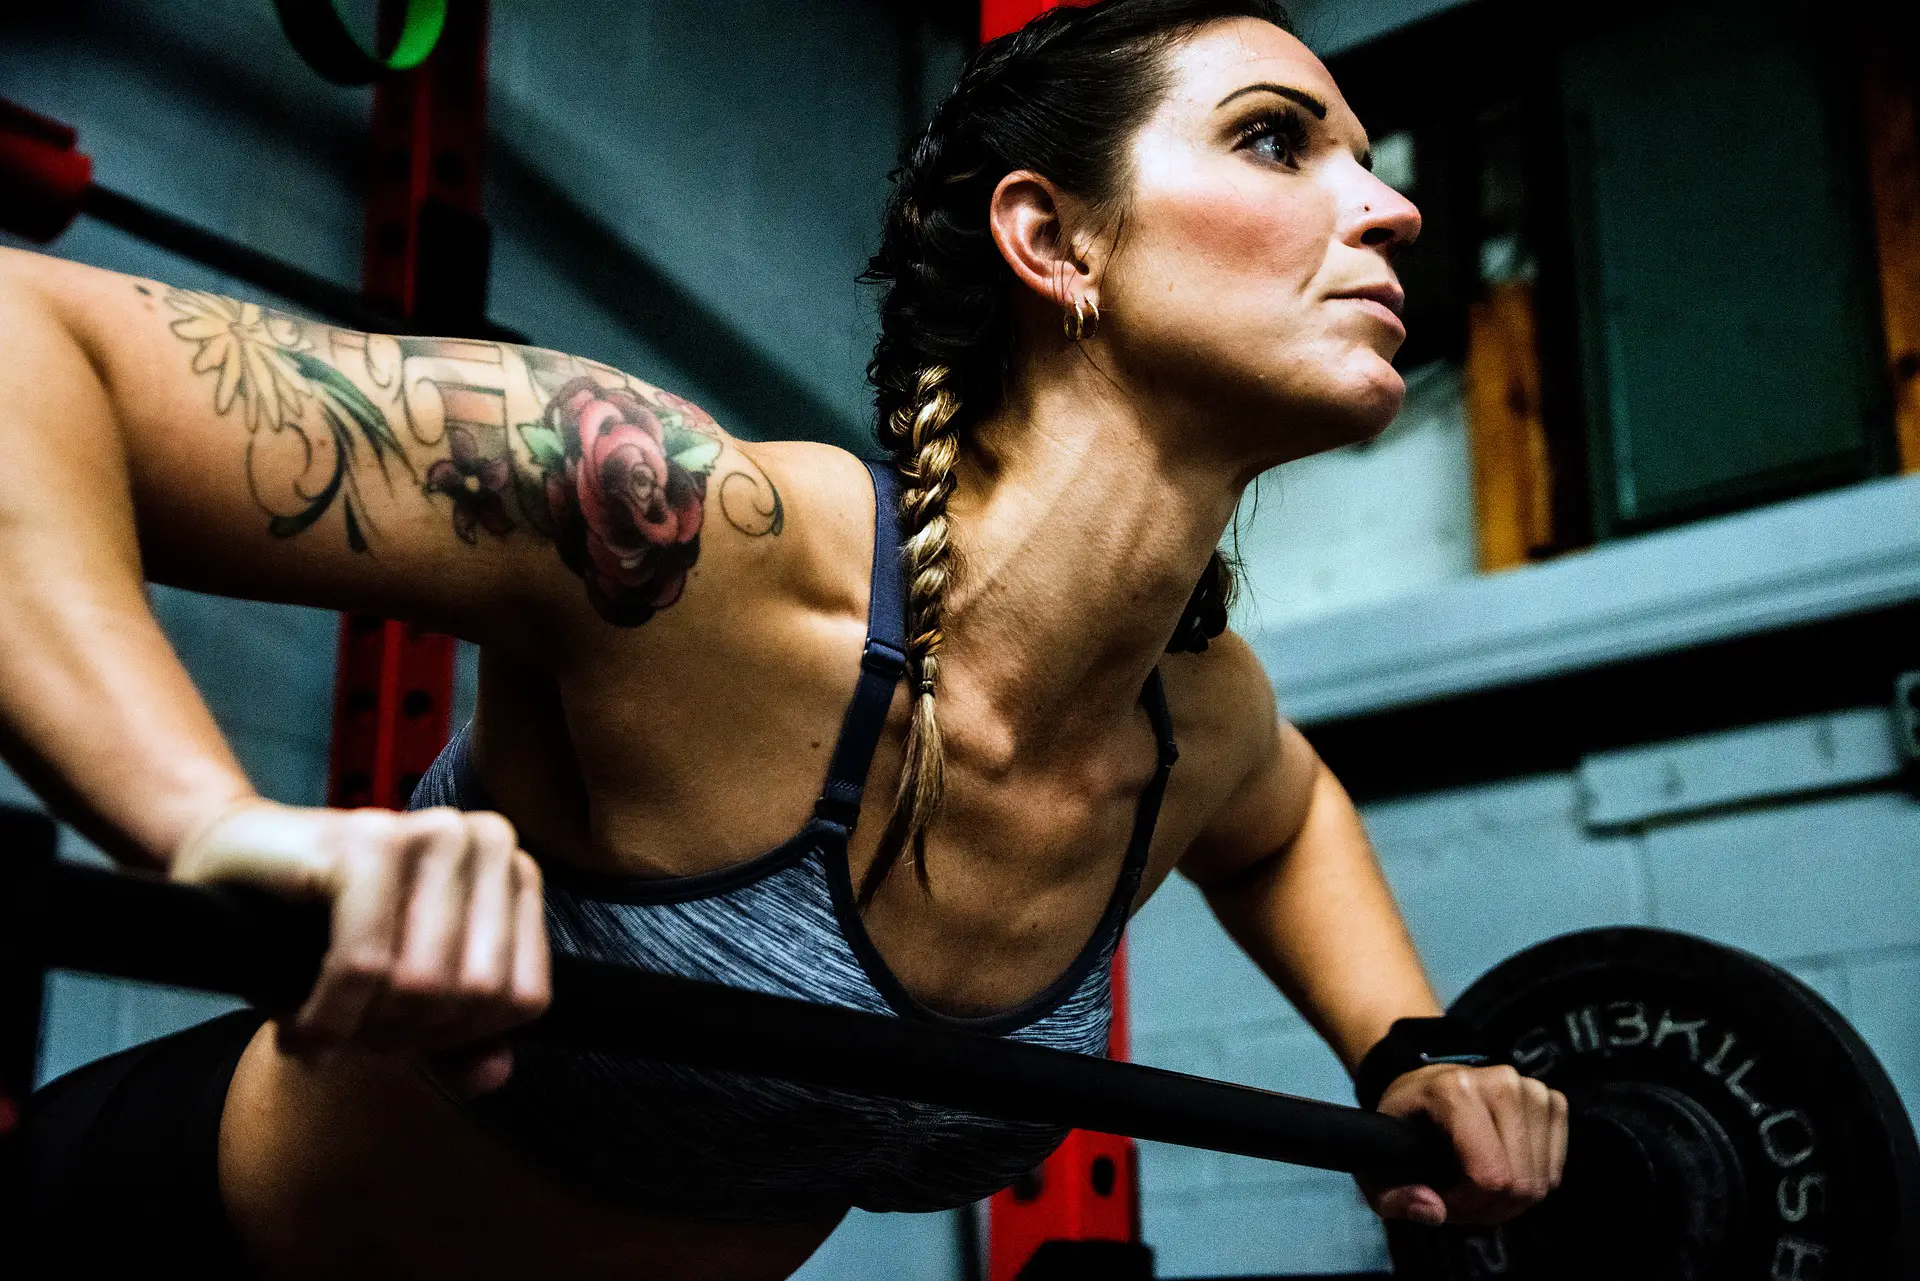 Can I Work Out With A New Tattoo? - Tattoo Safety Guide - Tattify